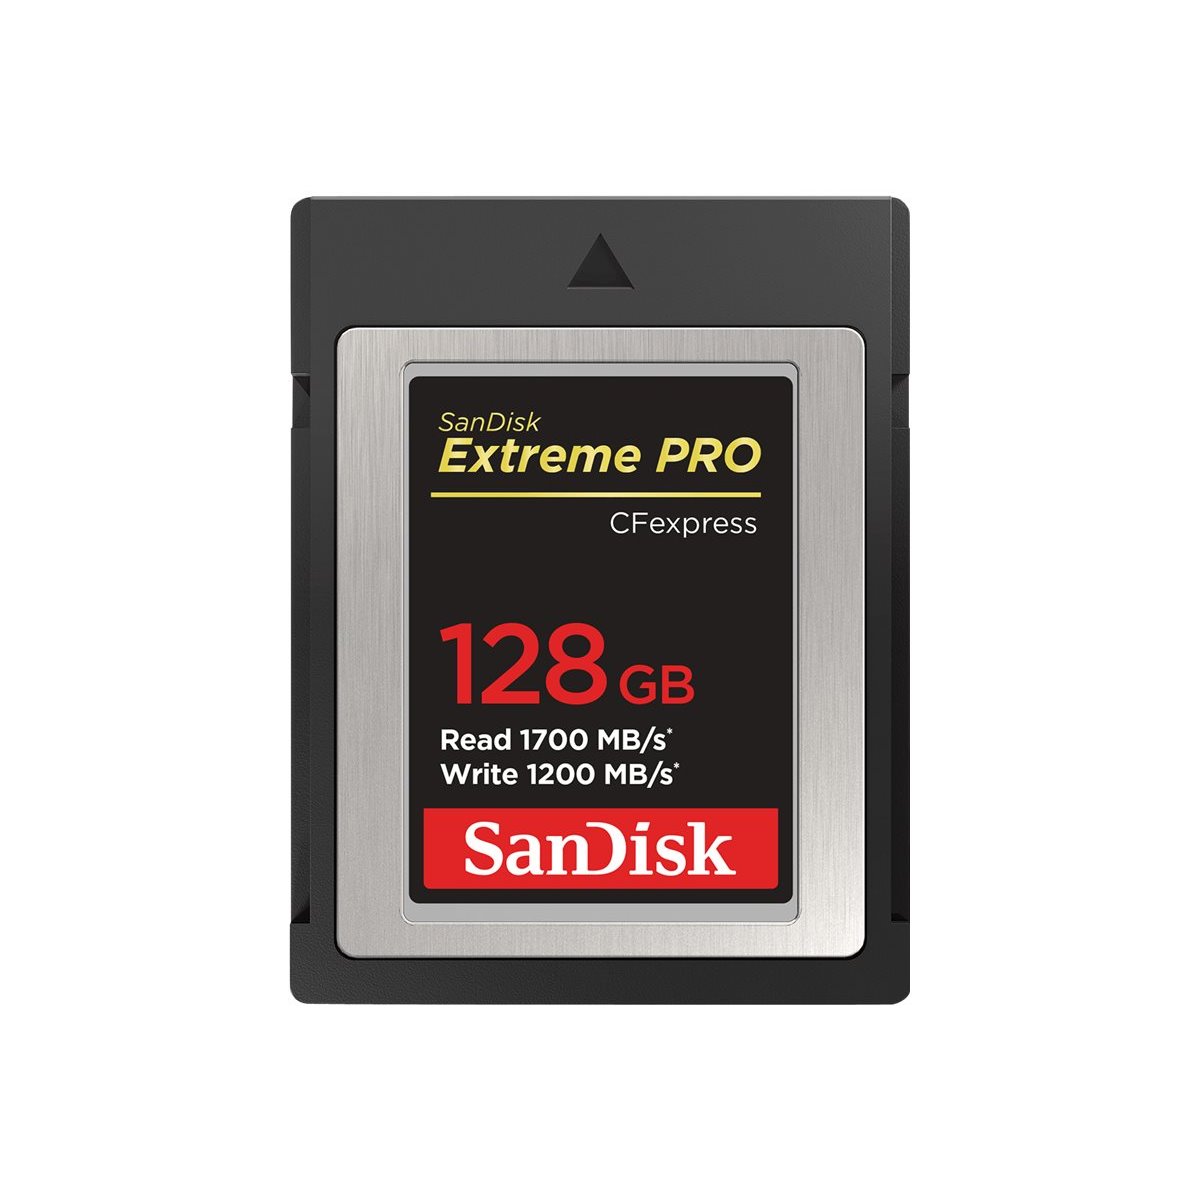 SanDisk Extreme Pro CFexpress Card 128GB, Type B, 1700MB-s Read, 1200MB-s Write